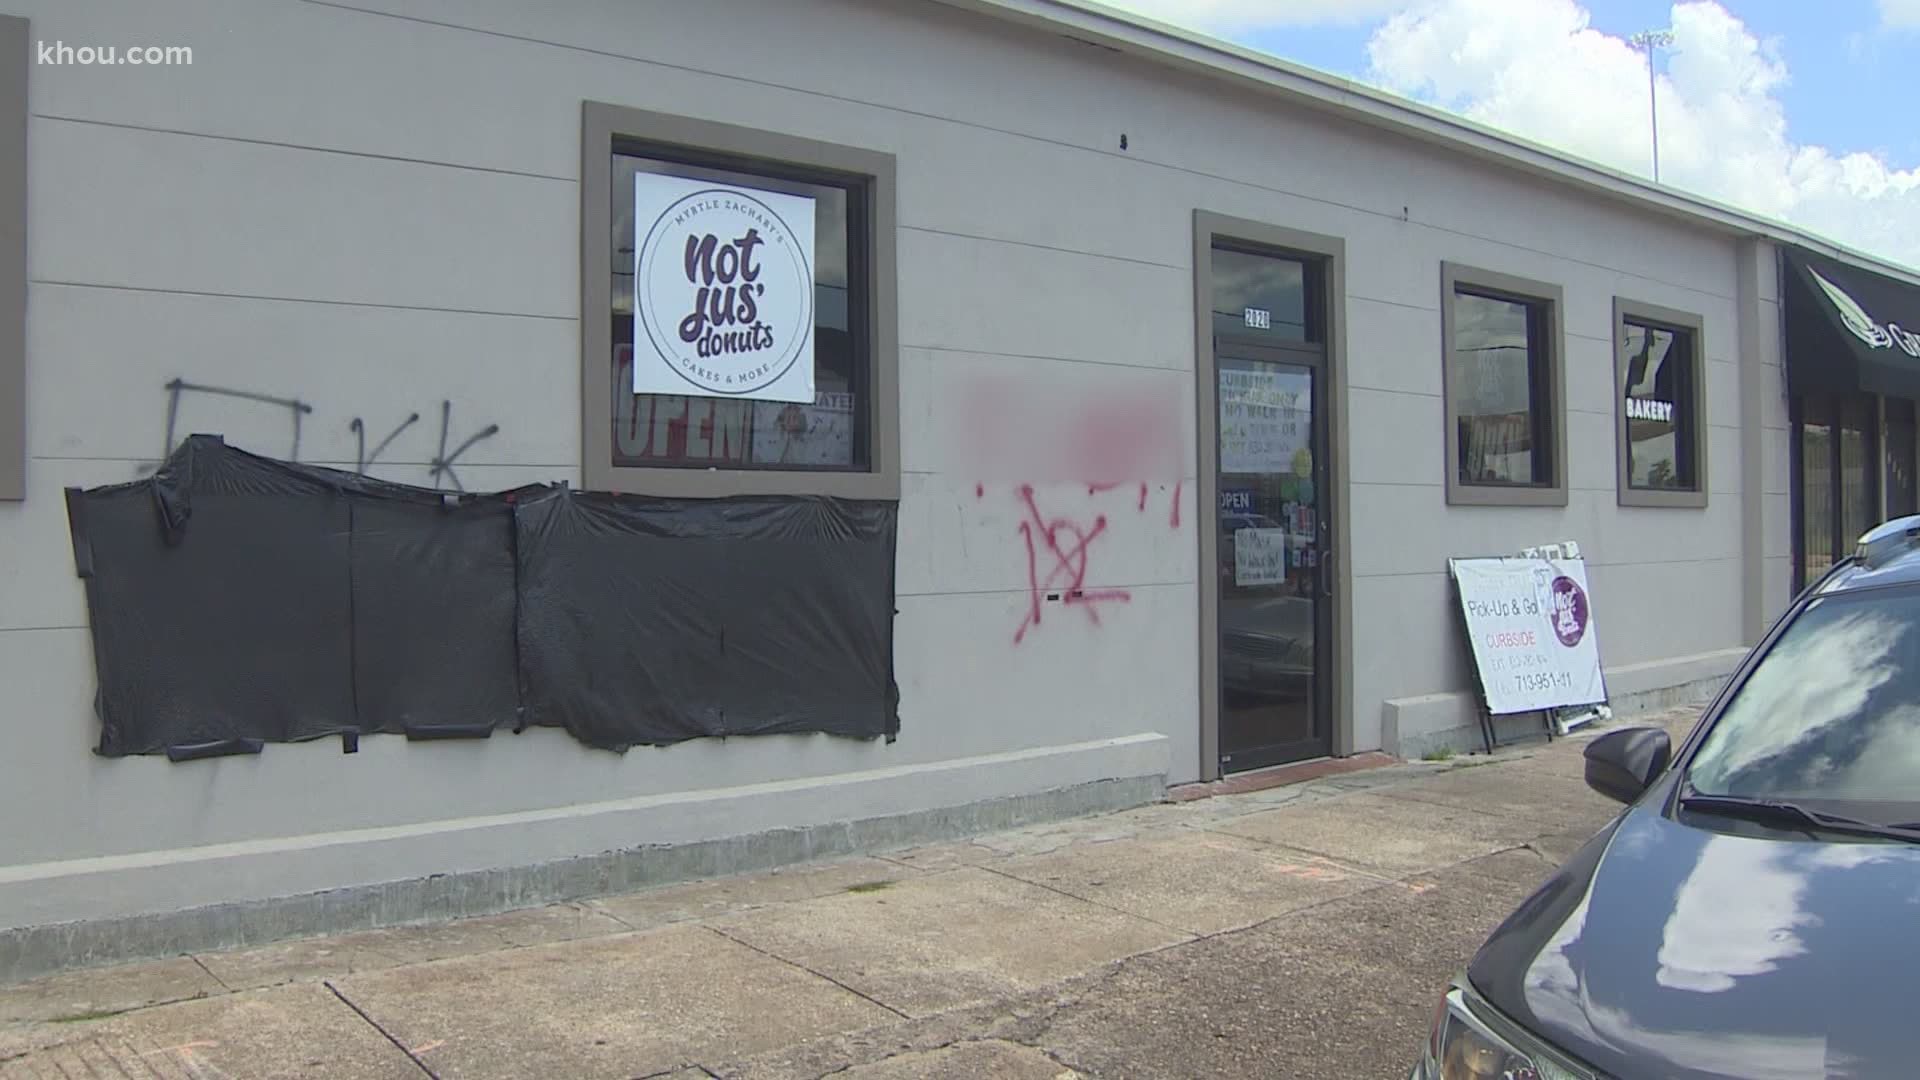 The owners of a bakery in Houston's Third Ward has a message for those who vandalized their shop with anti-police graffiti.